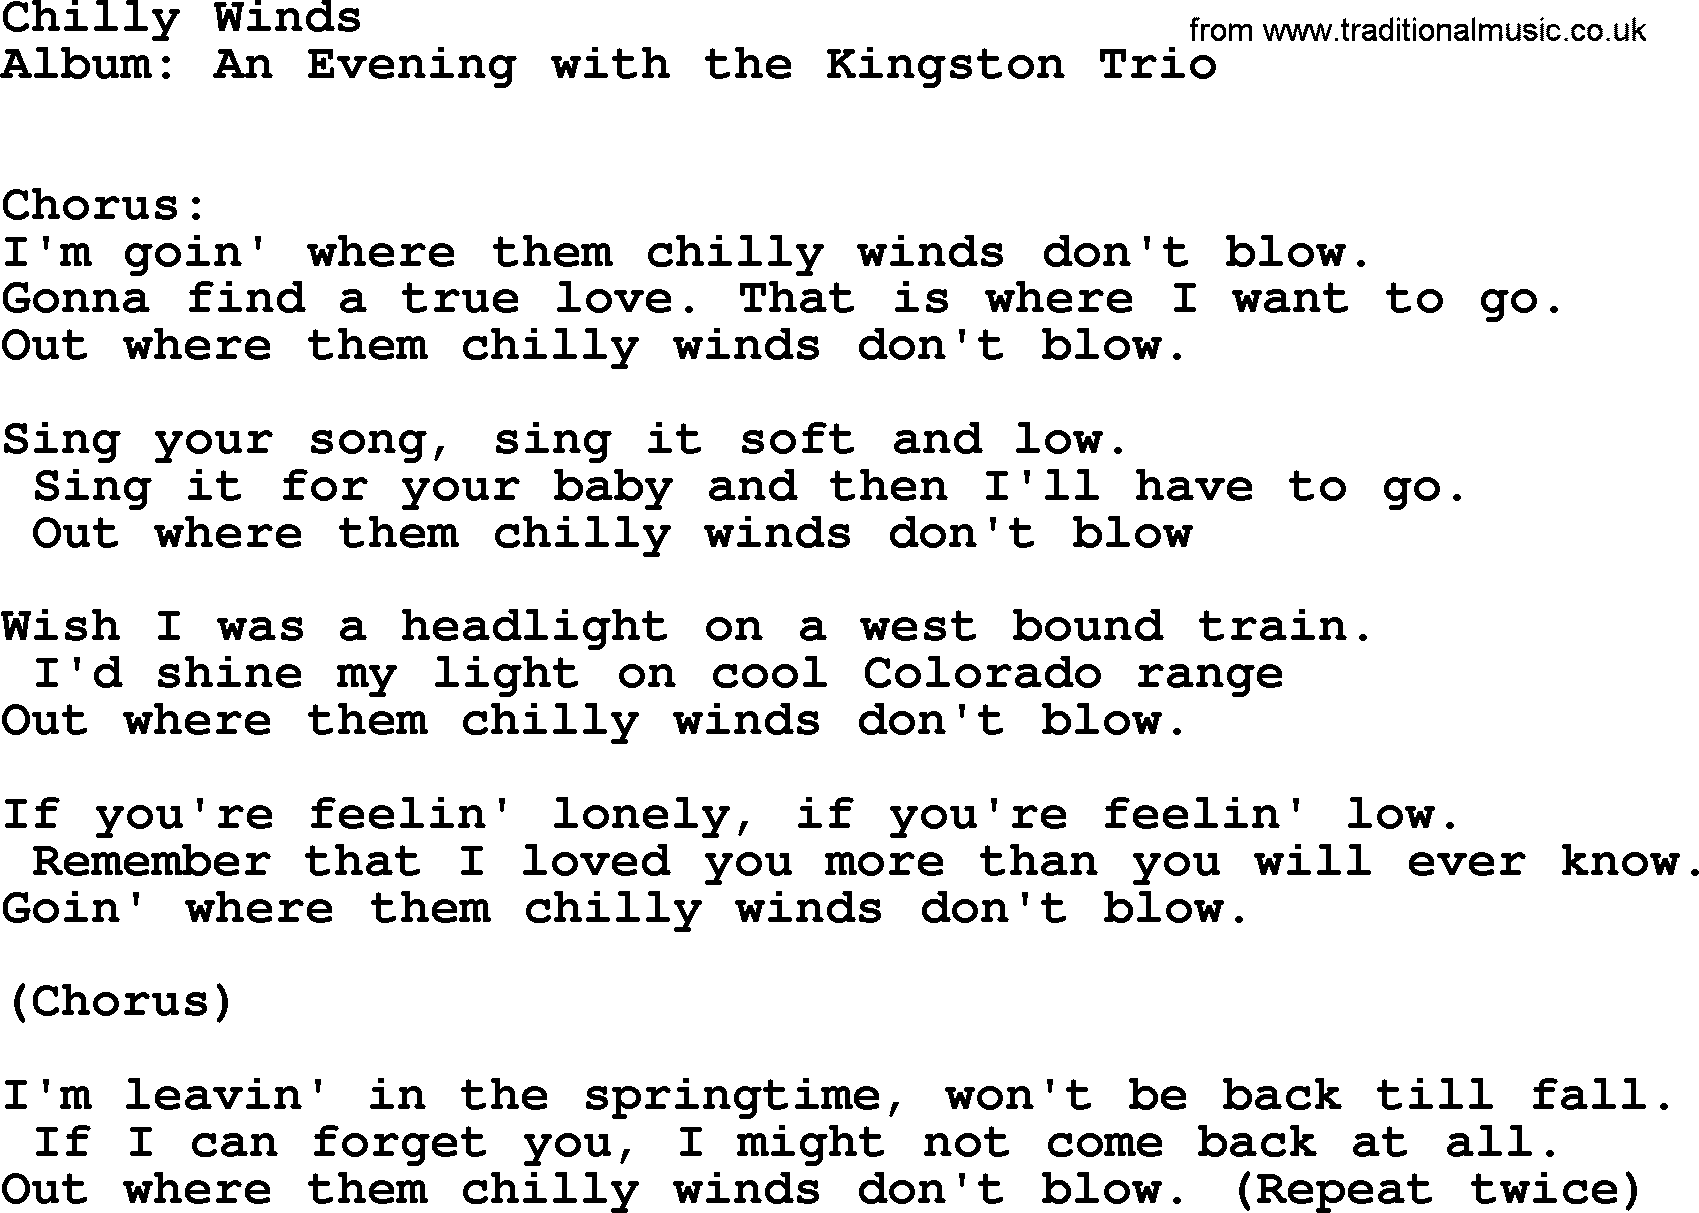 Kingston Trio song Chilly Winds, lyrics